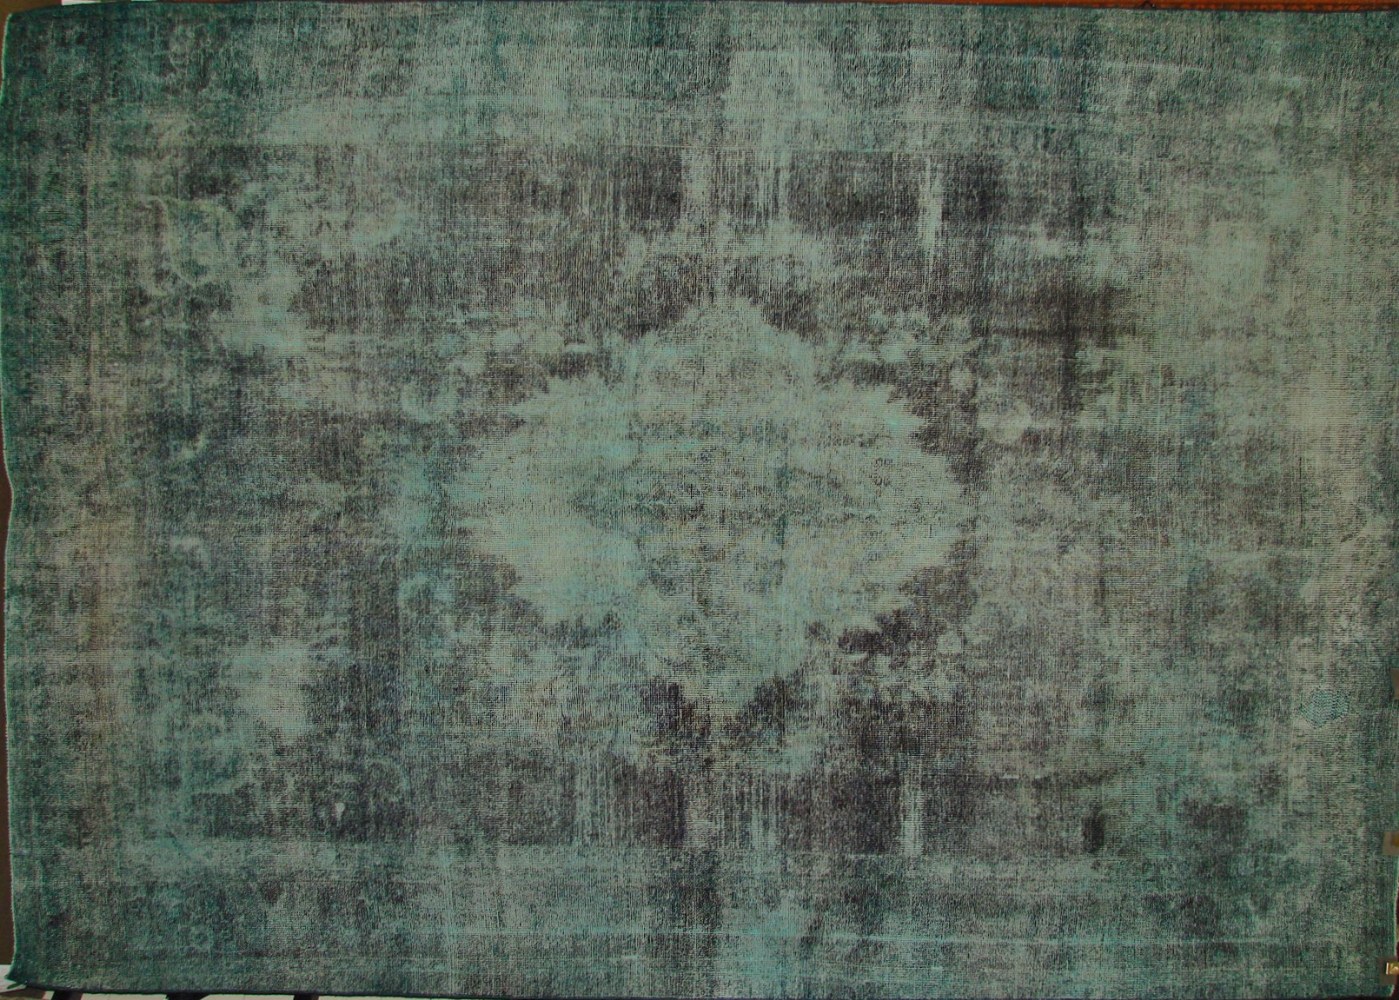 9x12 Vintage Hand Knotted Wool Area Rug - MR17290